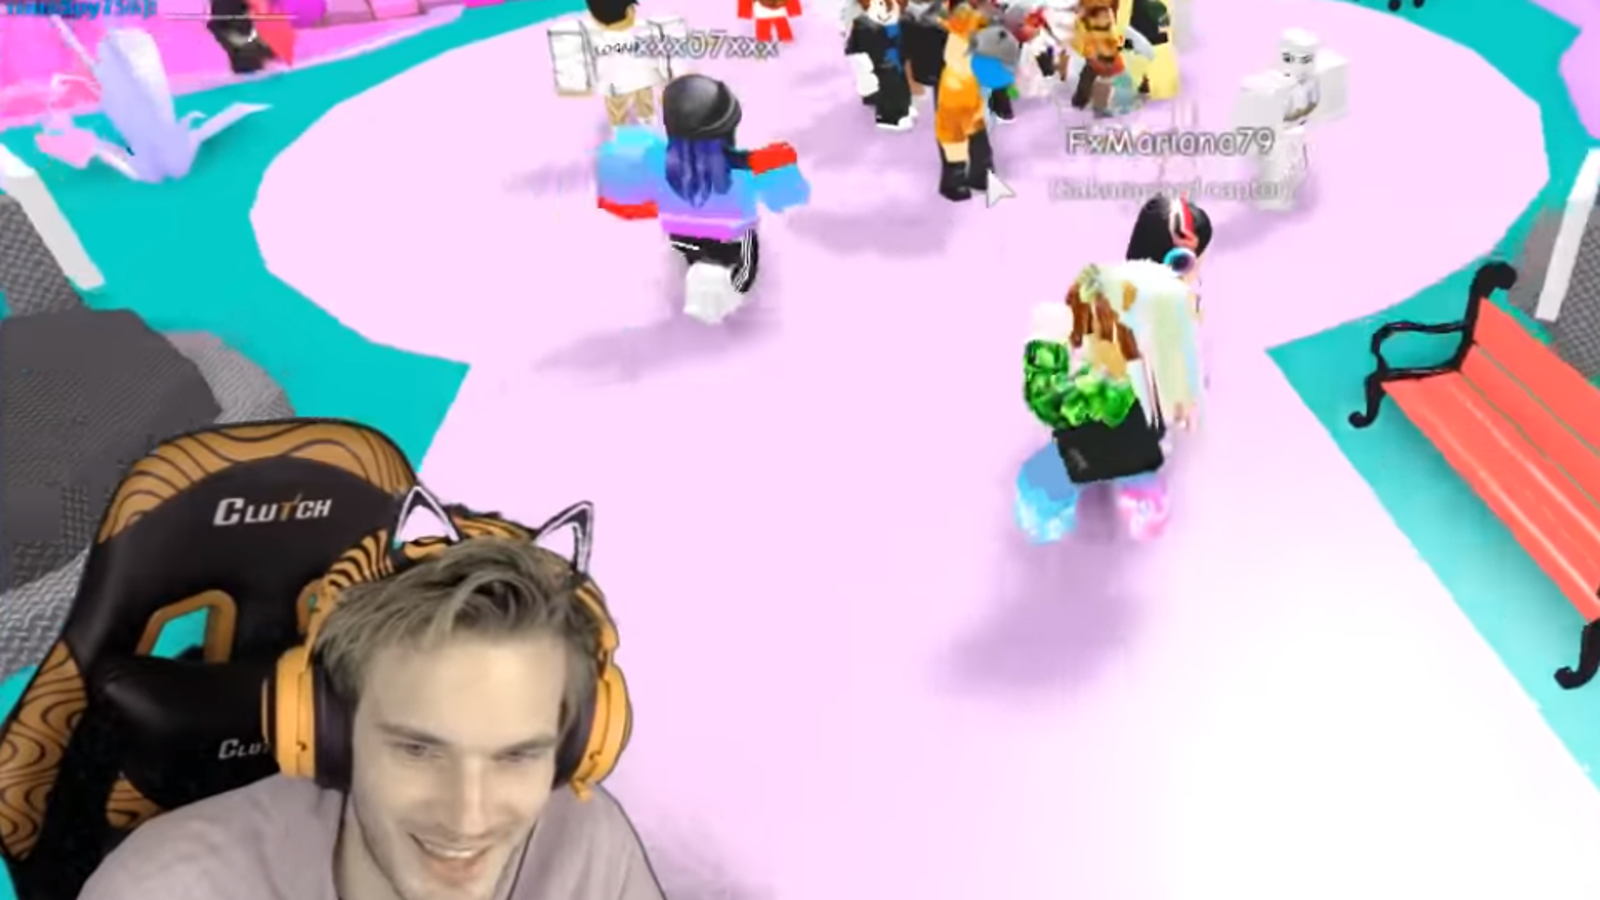 Pewdiepie Clashes With Roblox Which Appears To Have Banned His Name - pewdiepie clashes with roblox which appears to have banned his name update